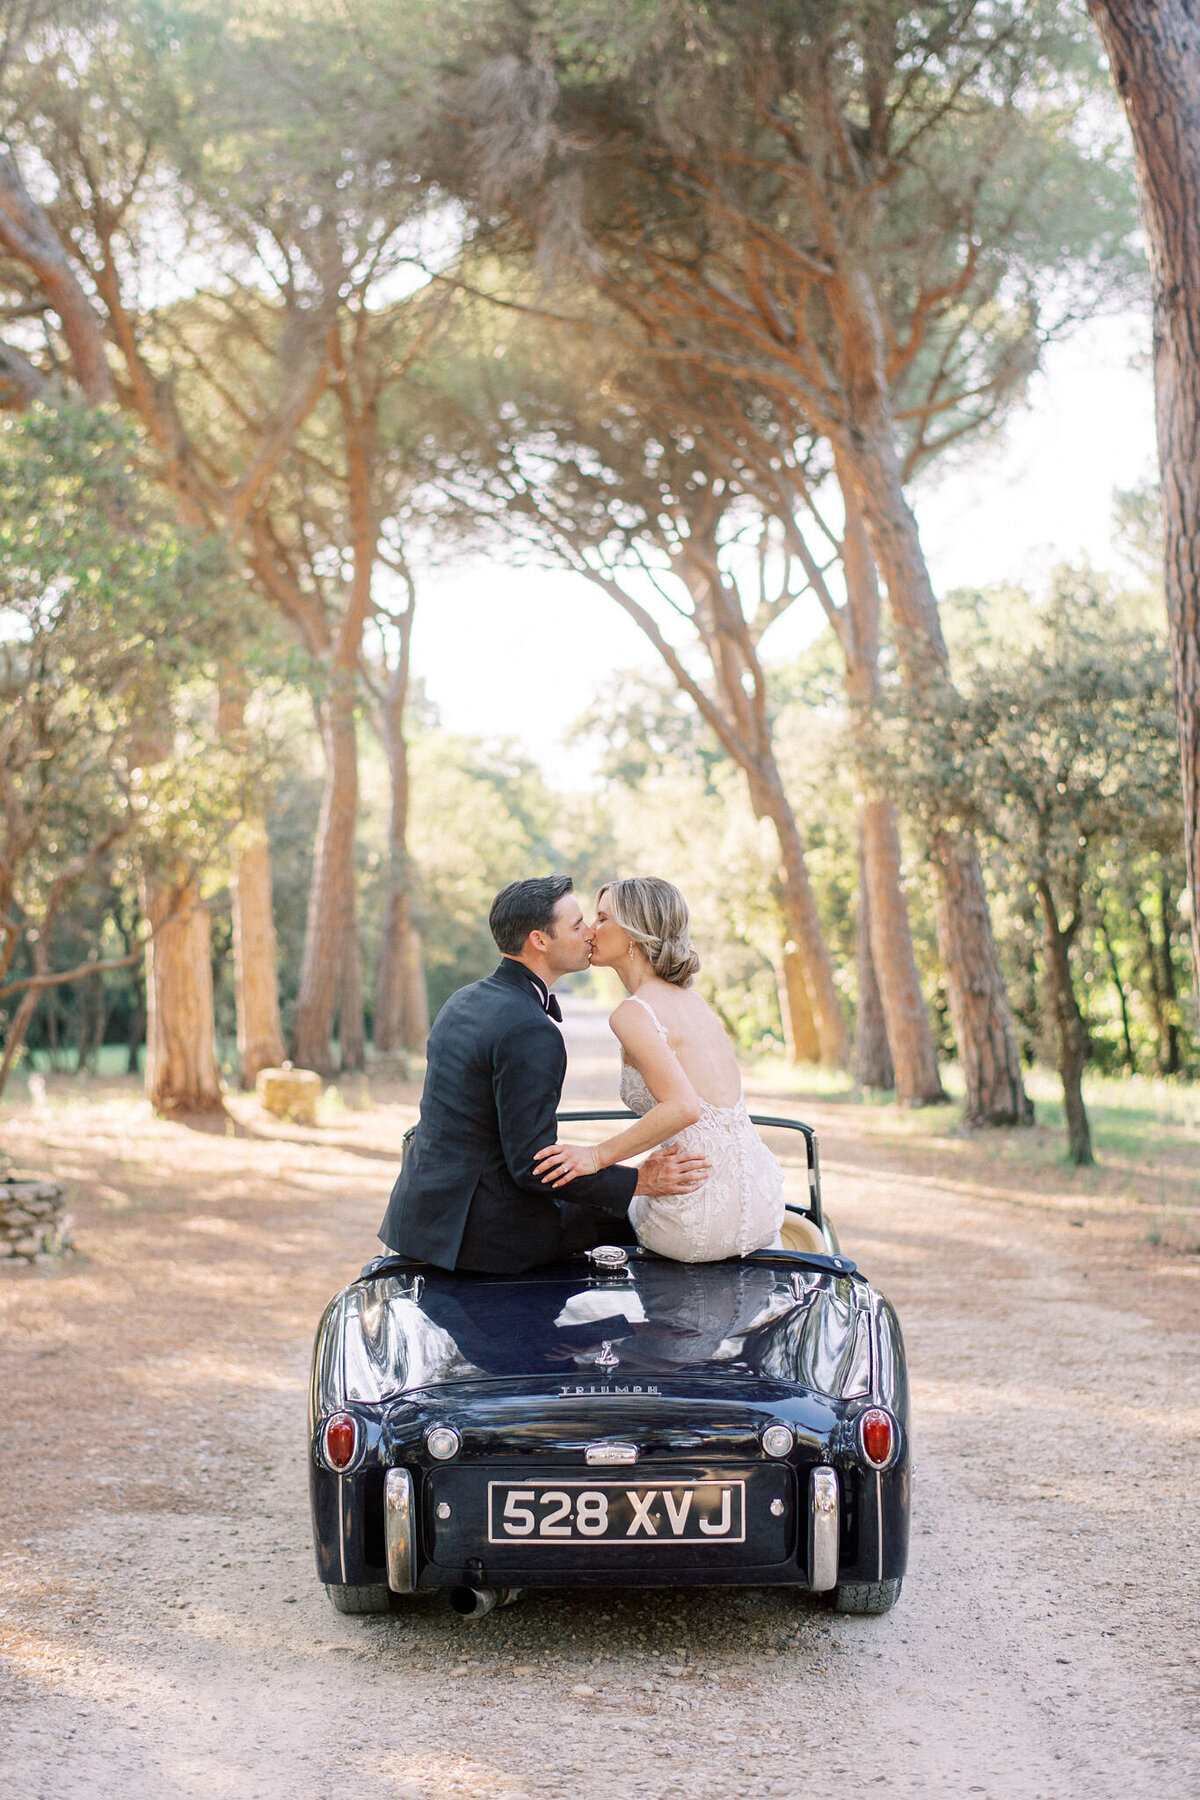 Jennifer Fox Weddings English speaking wedding planning & design agency in France crafting refined and bespoke weddings and celebrations Provence, Paris and destination MailysFortunePhotography_Jordan&Brian_15preview